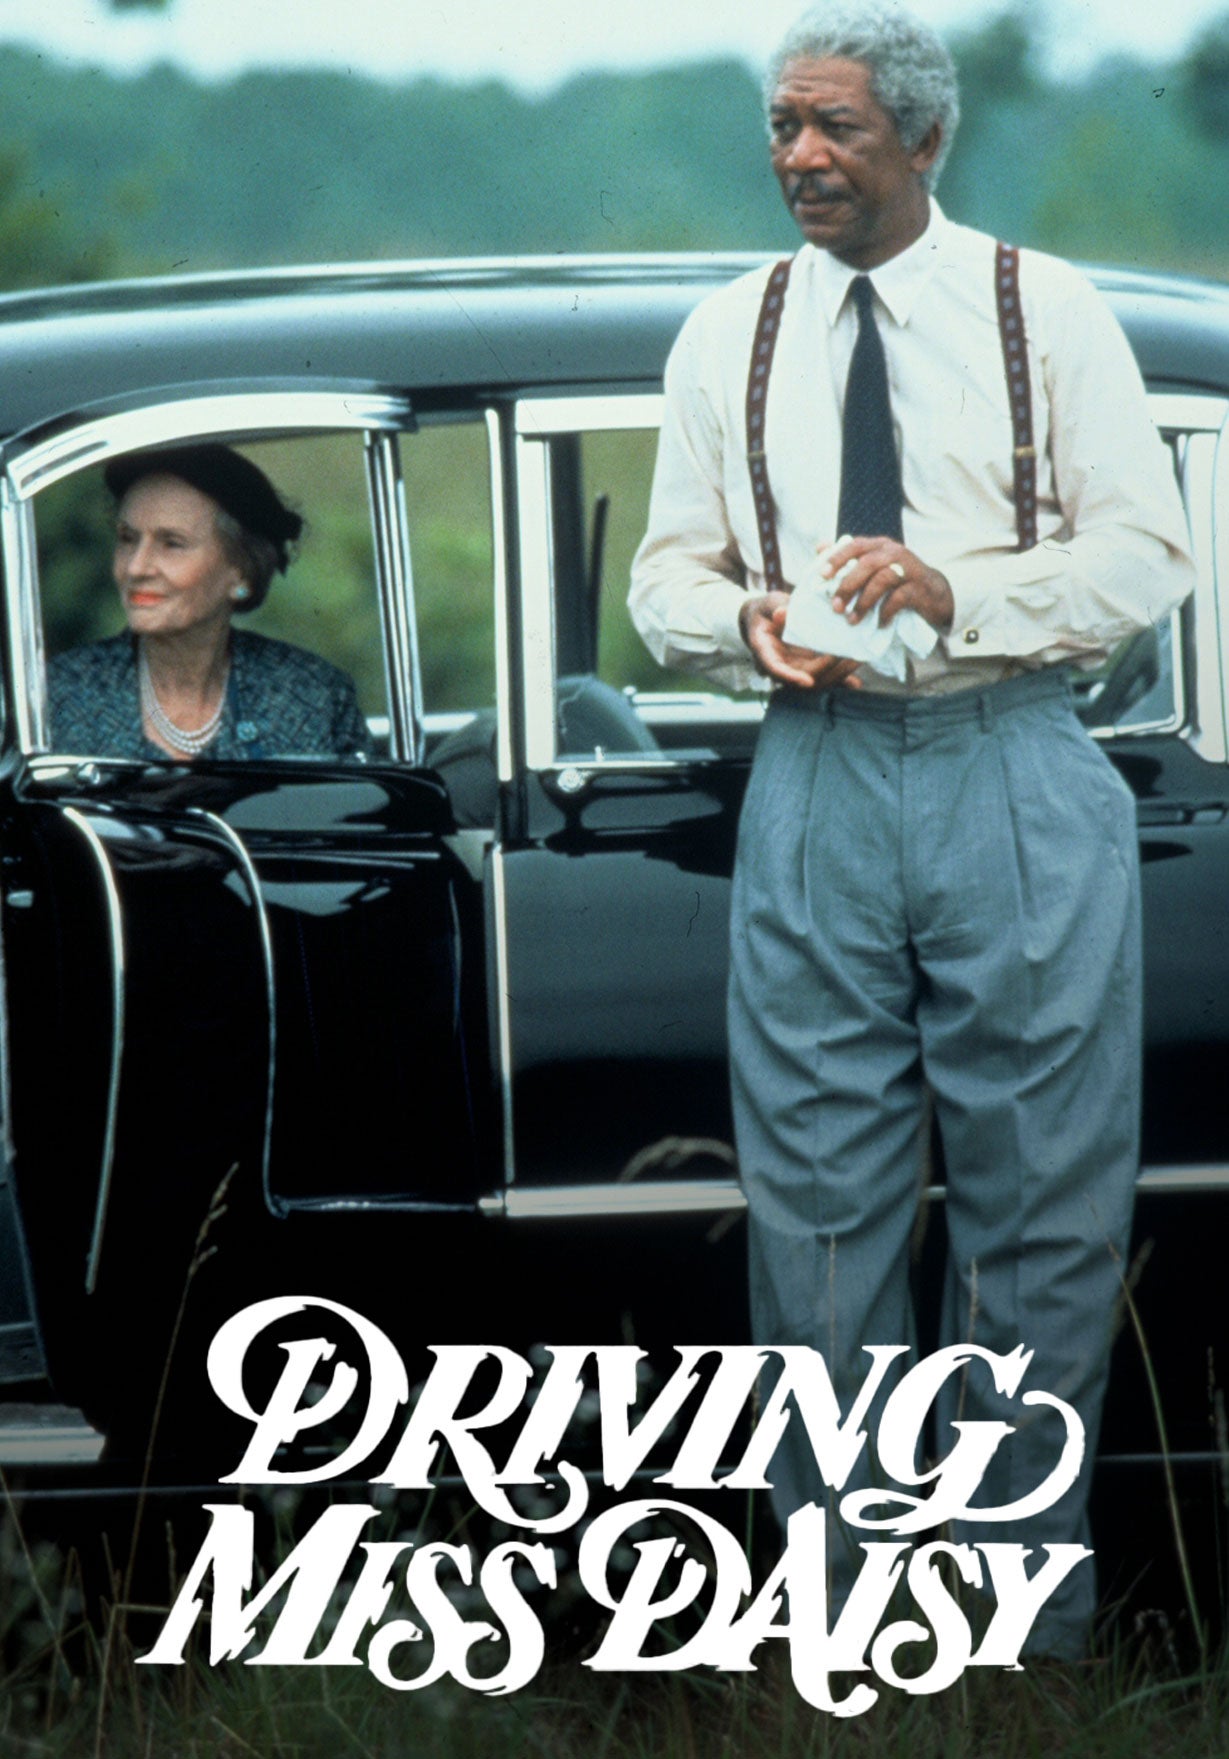 Driving Miss Daisy show - mobile